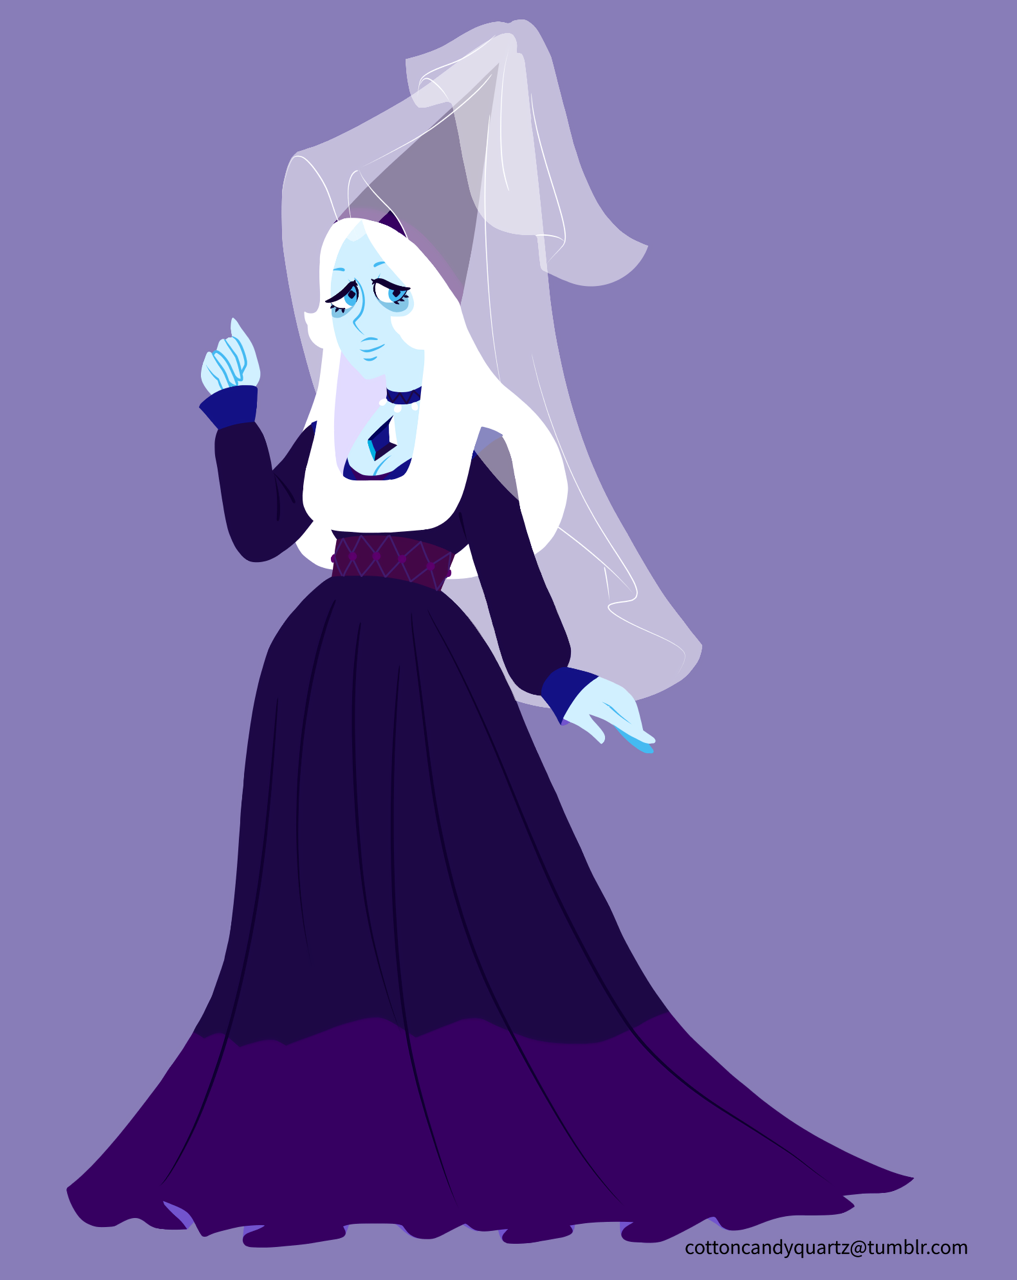 Happy late Halloween! 🎃💀👻 Here’s Blue Diamond in a style from the 1100s-1450s time period~